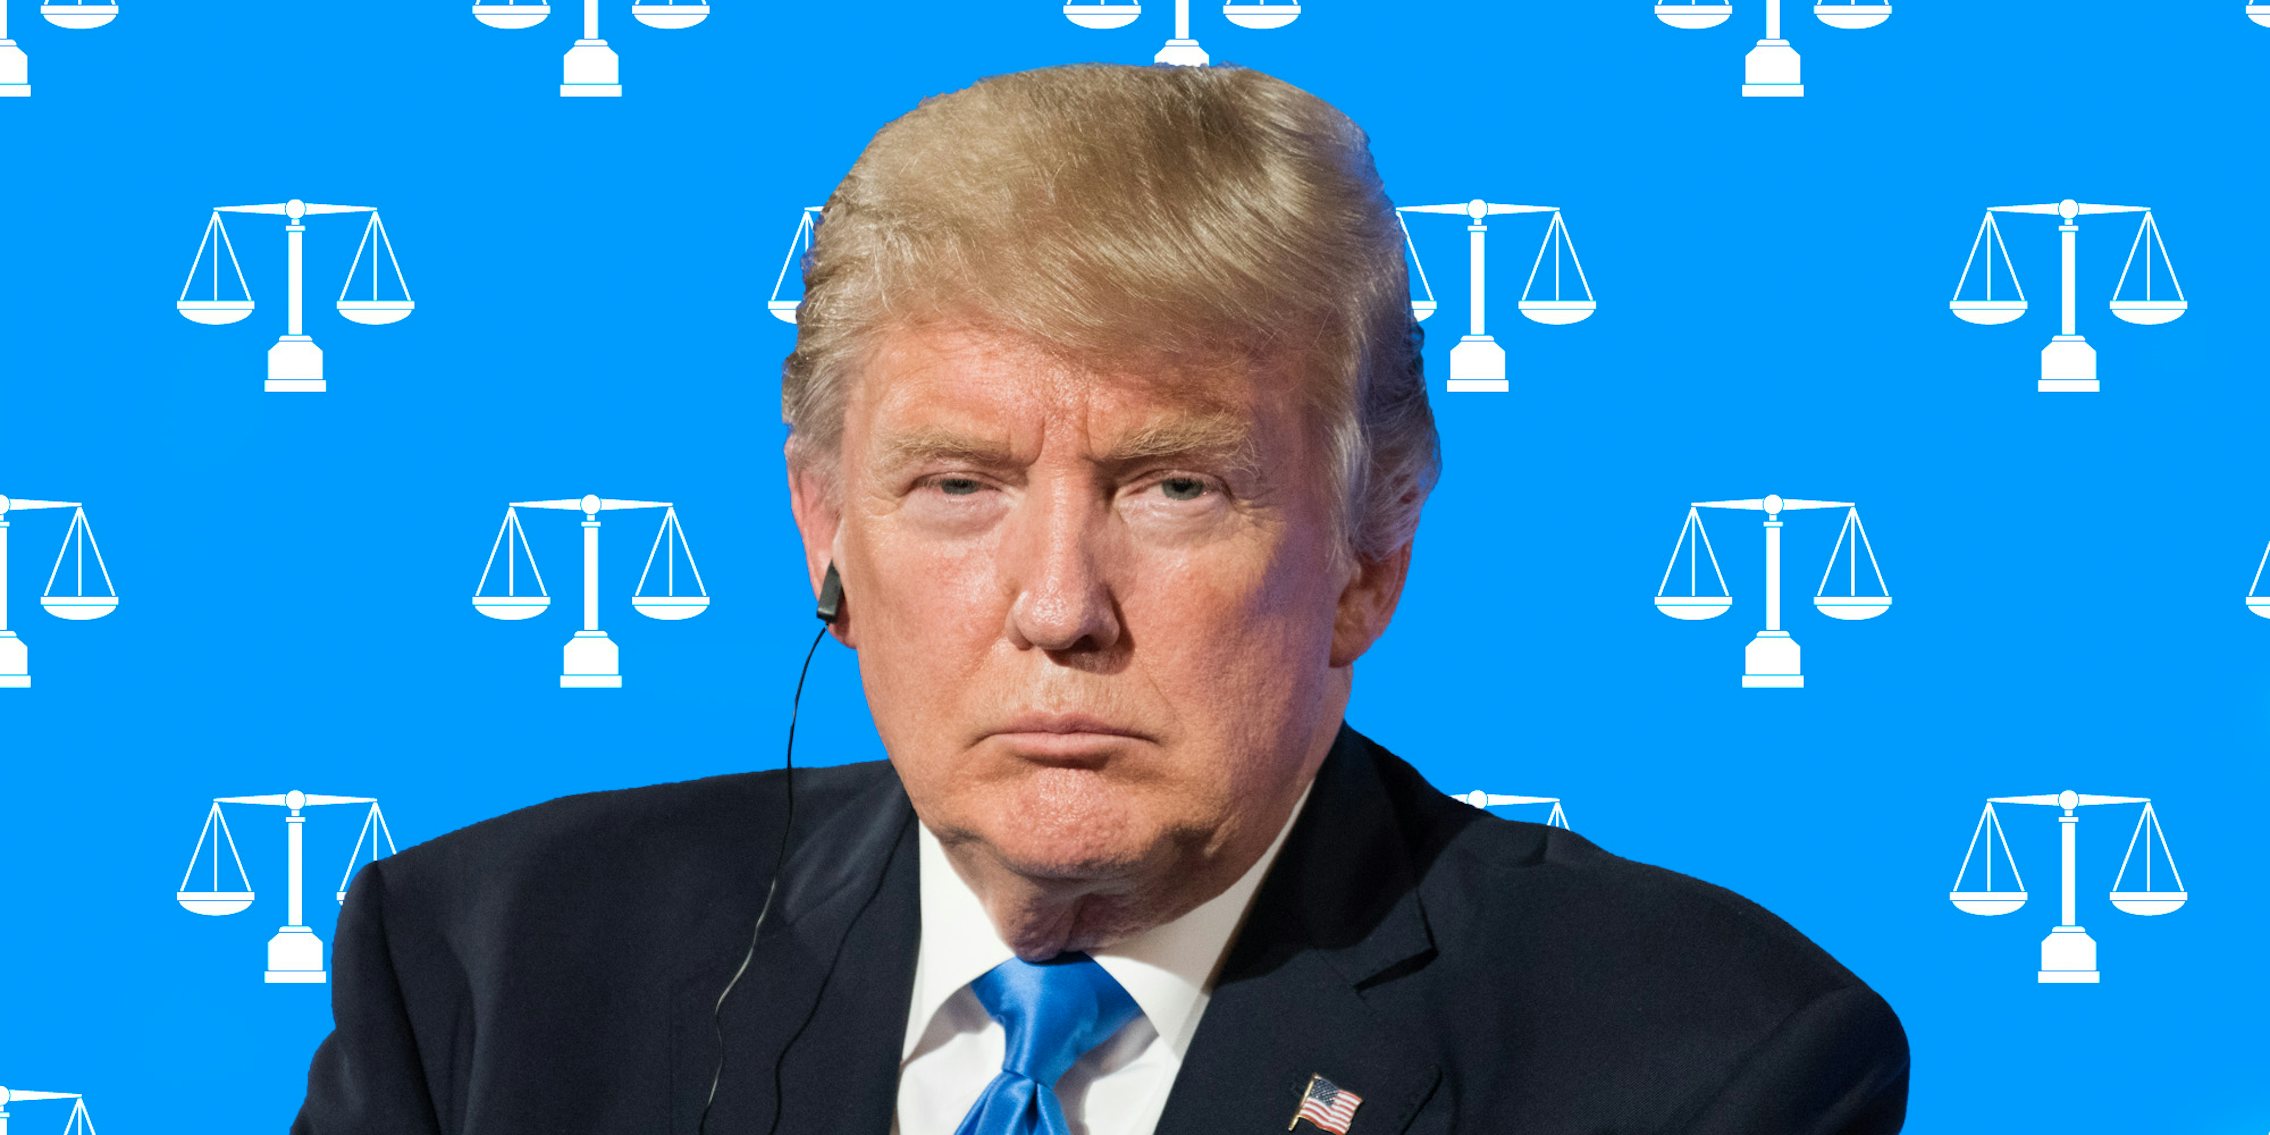 Donald Trump on blue law scale pattern background